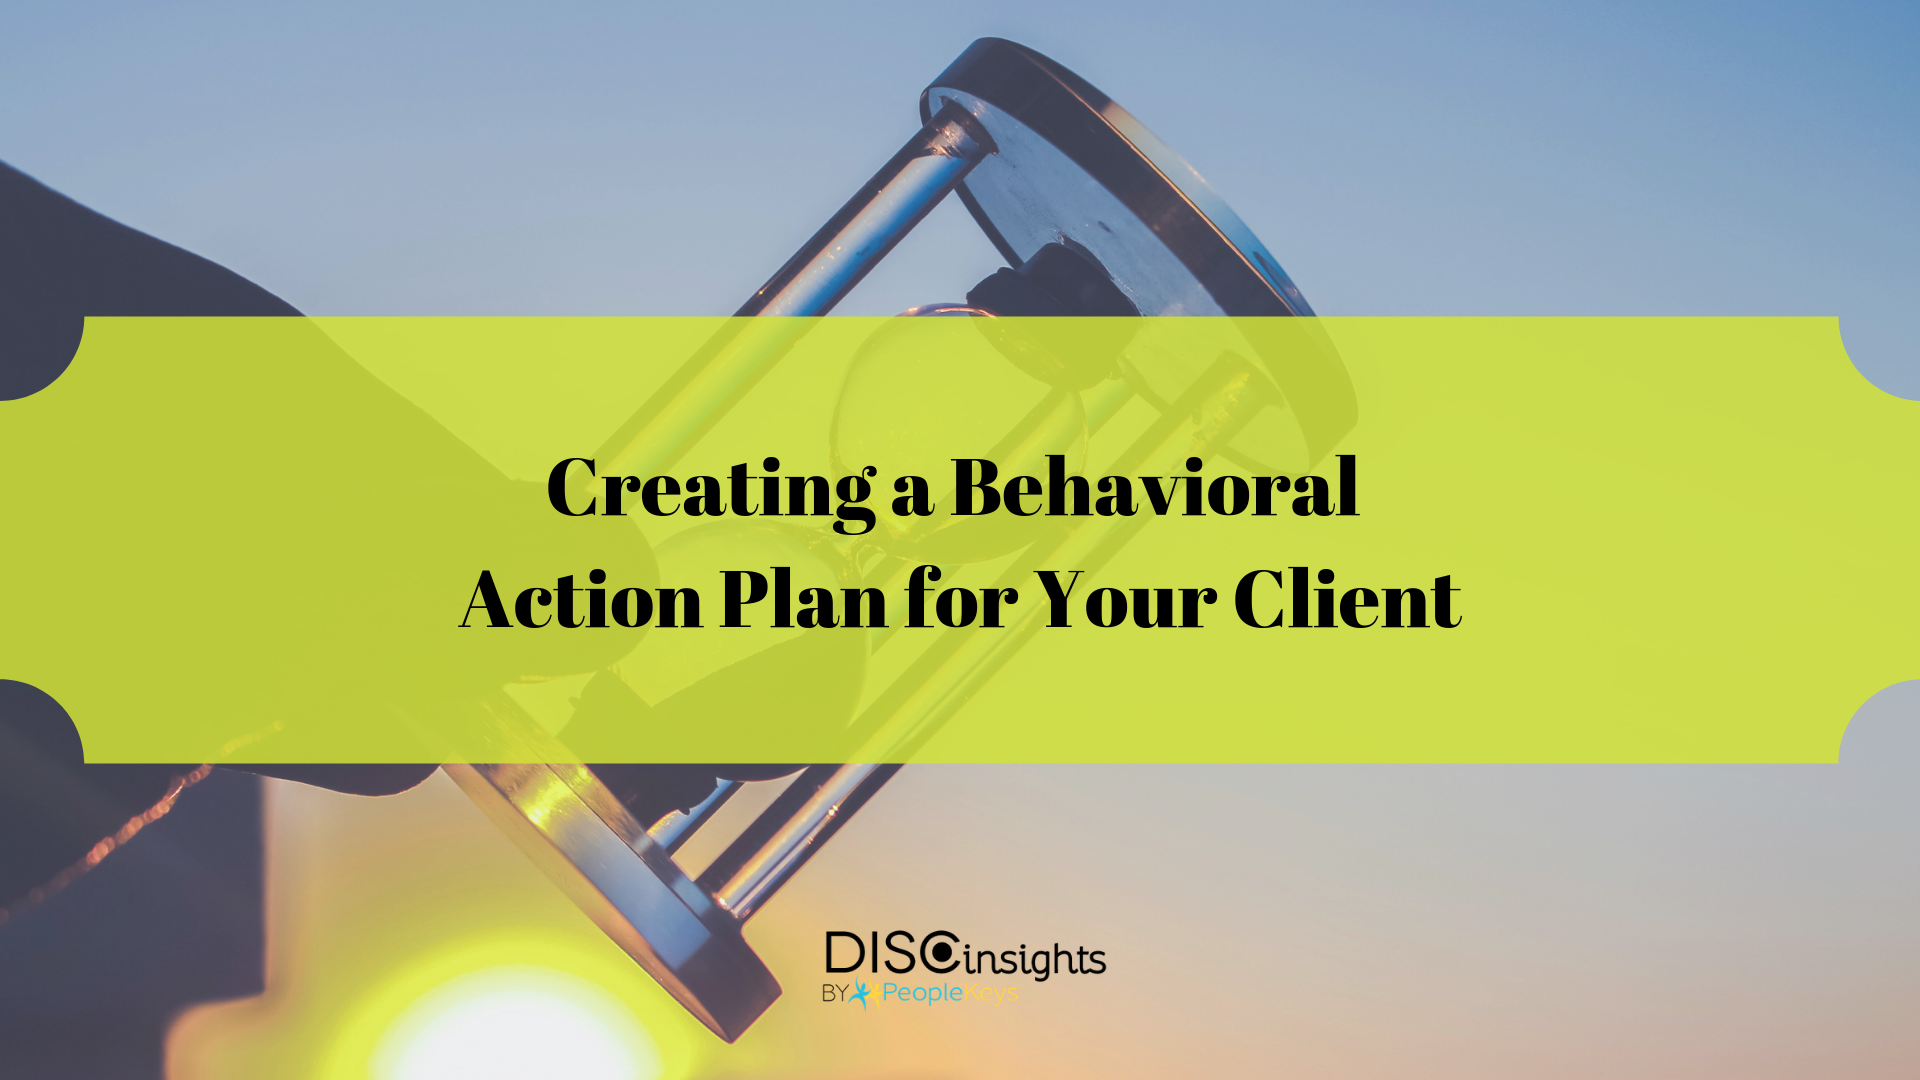 Creating a Behavioral Action Plan for Your Client